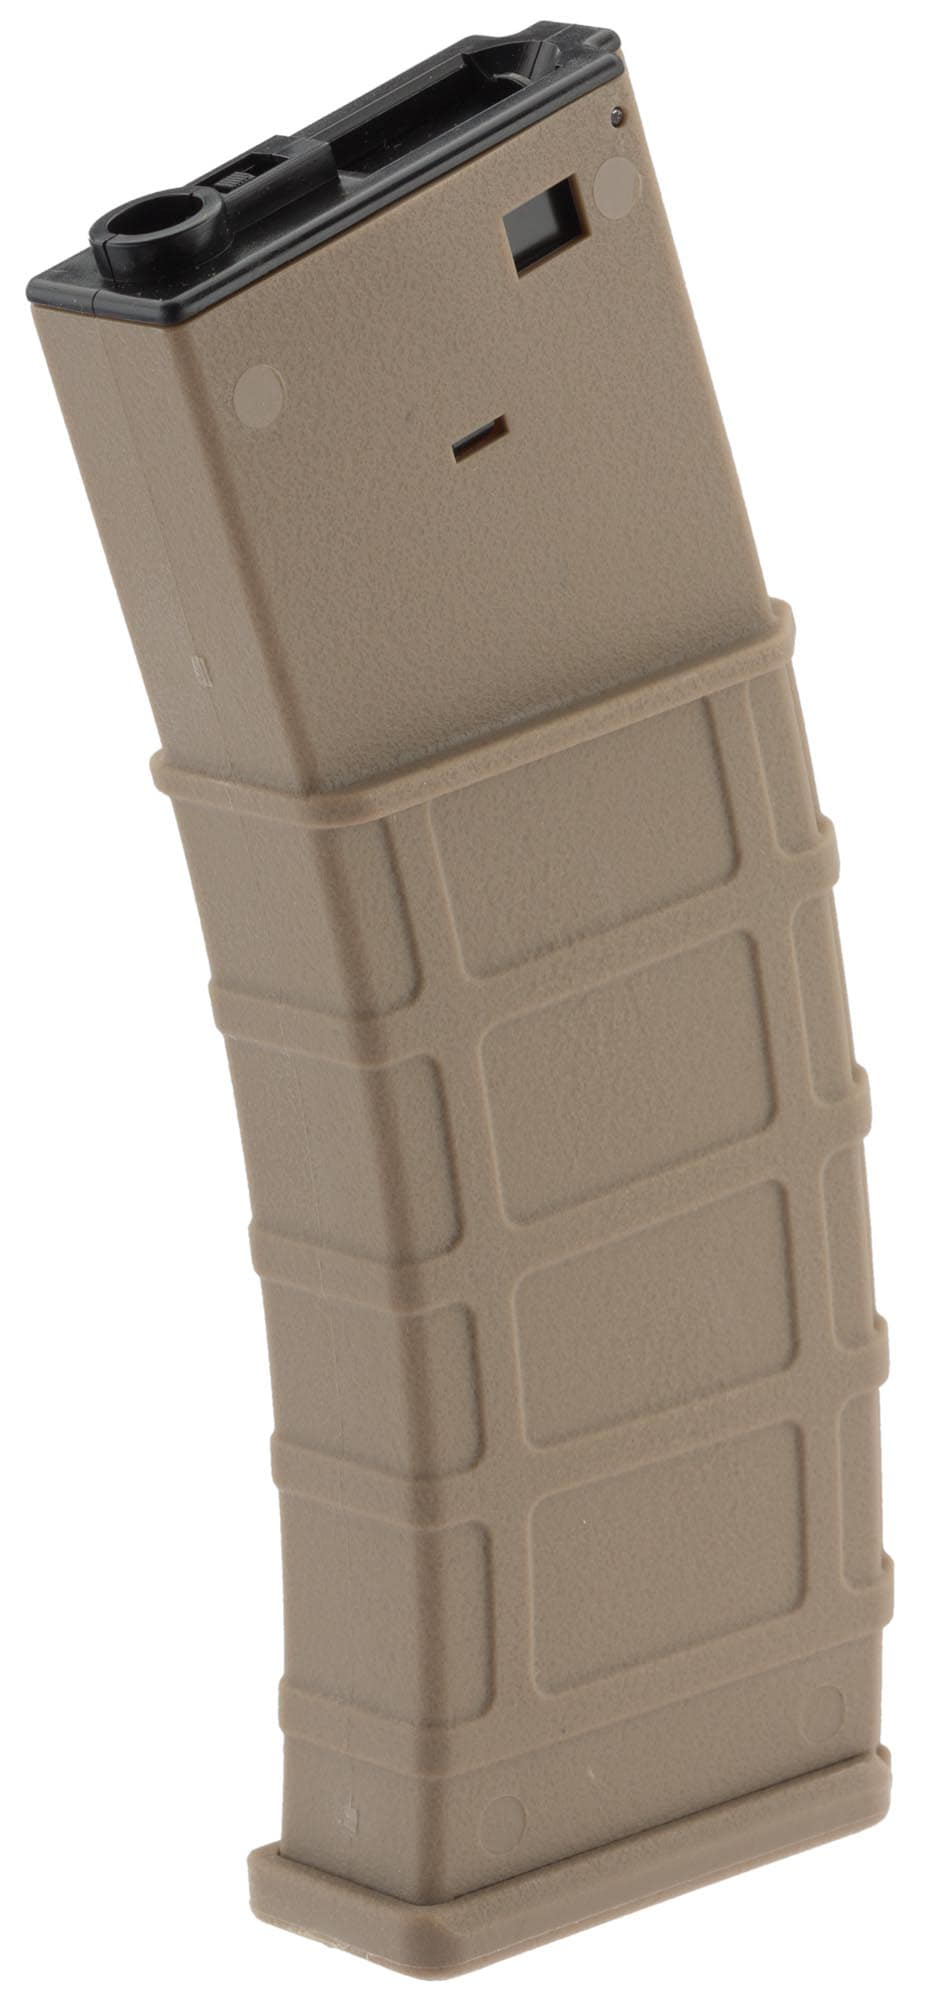 Photo Airsoft Magazine Polymer Flash Hi Cap 360 rds for M4-M16 (made by Lonex) - Tan